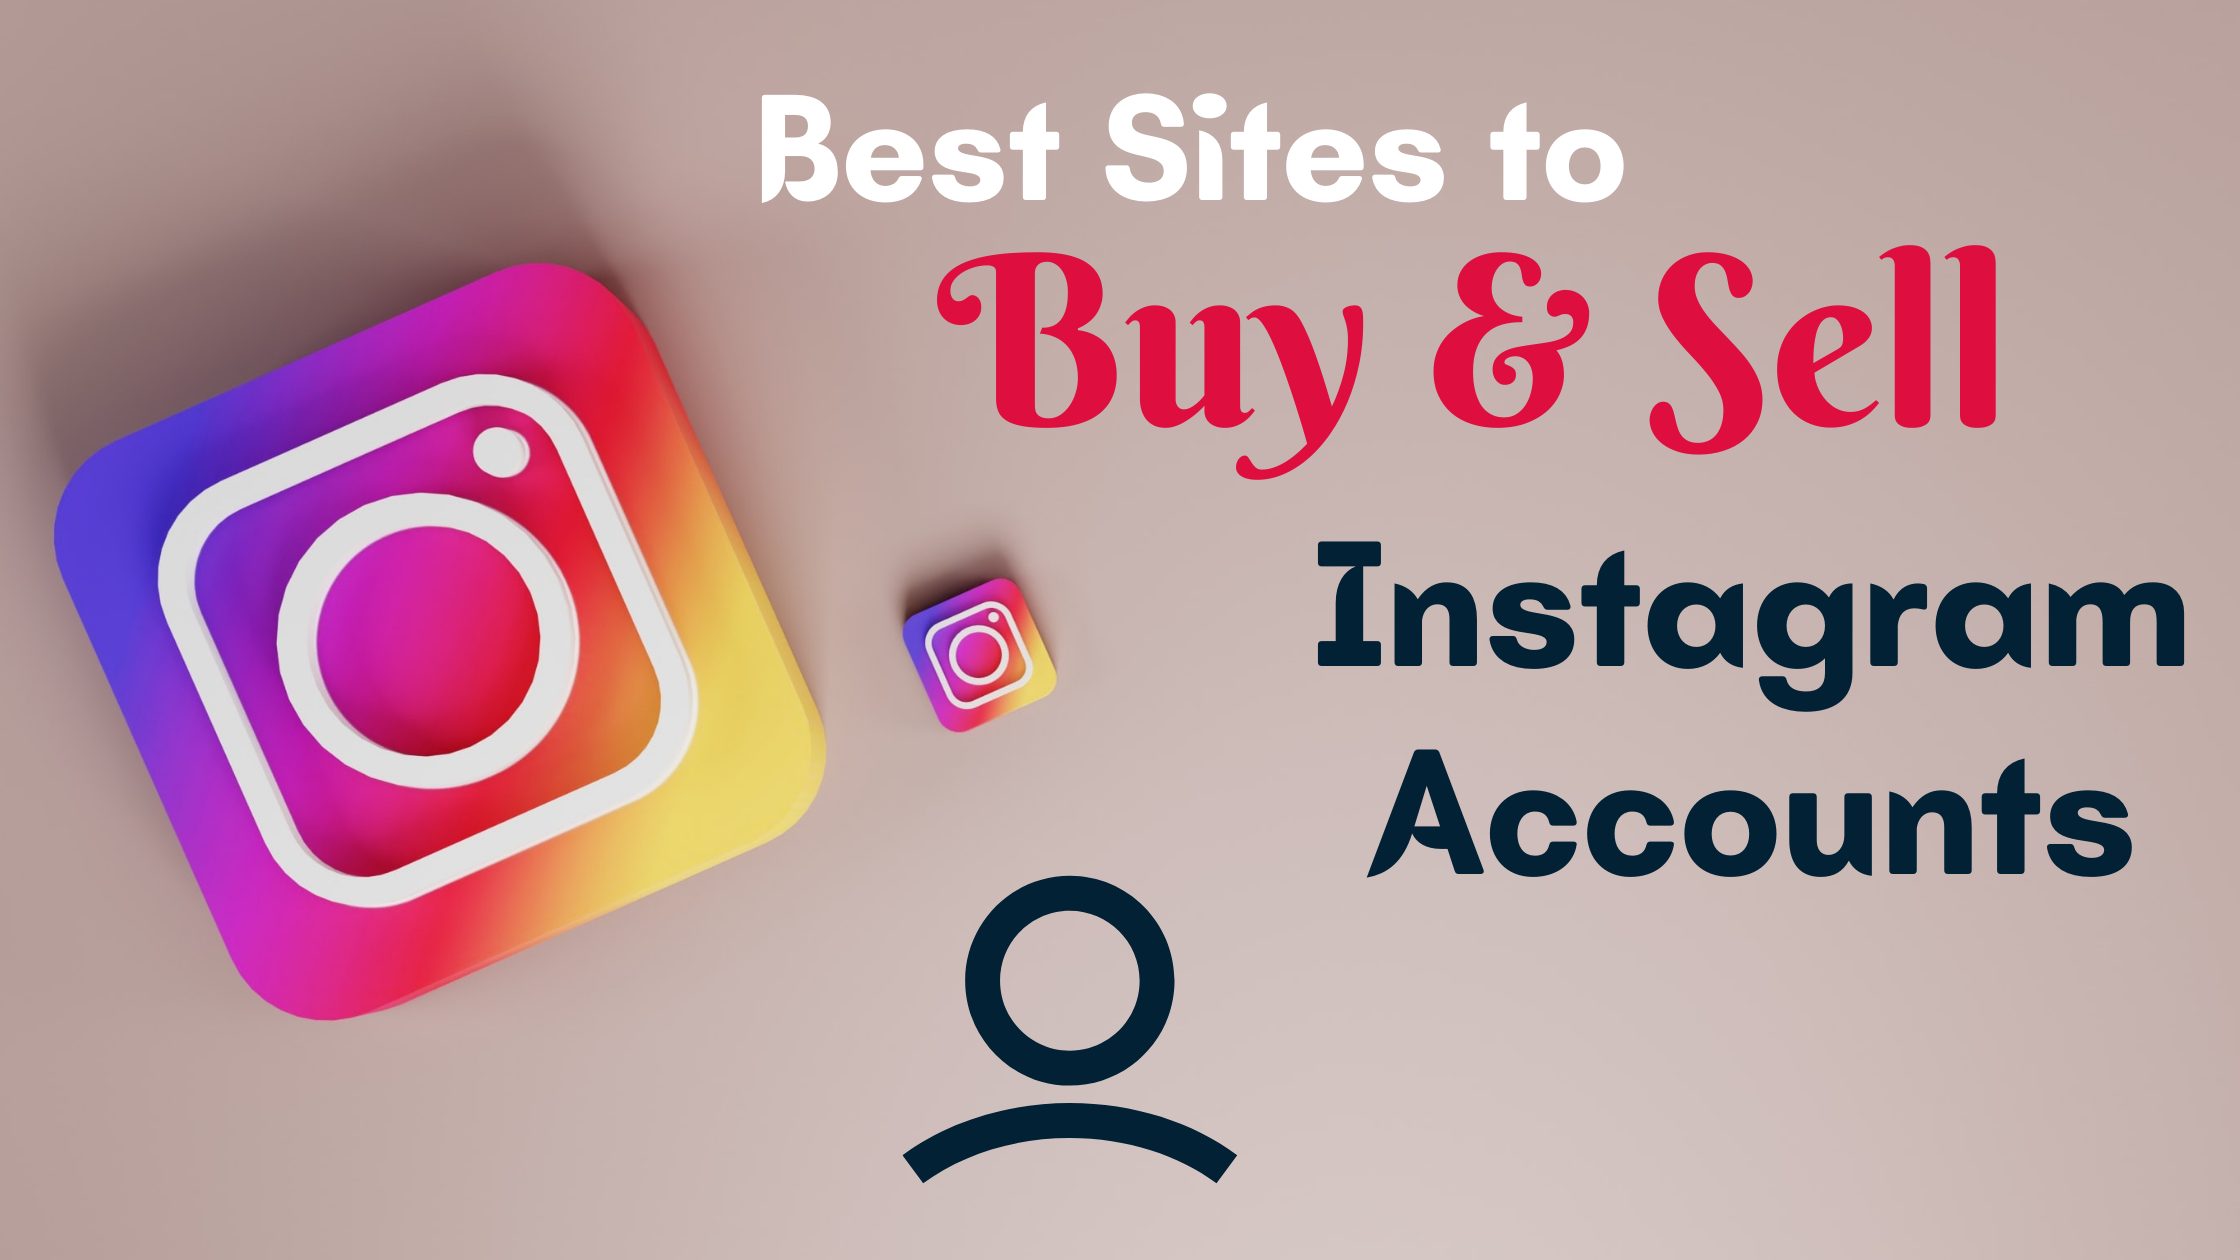 Instagram Legal Verified Account For Sale - Buy & Sell Instagram